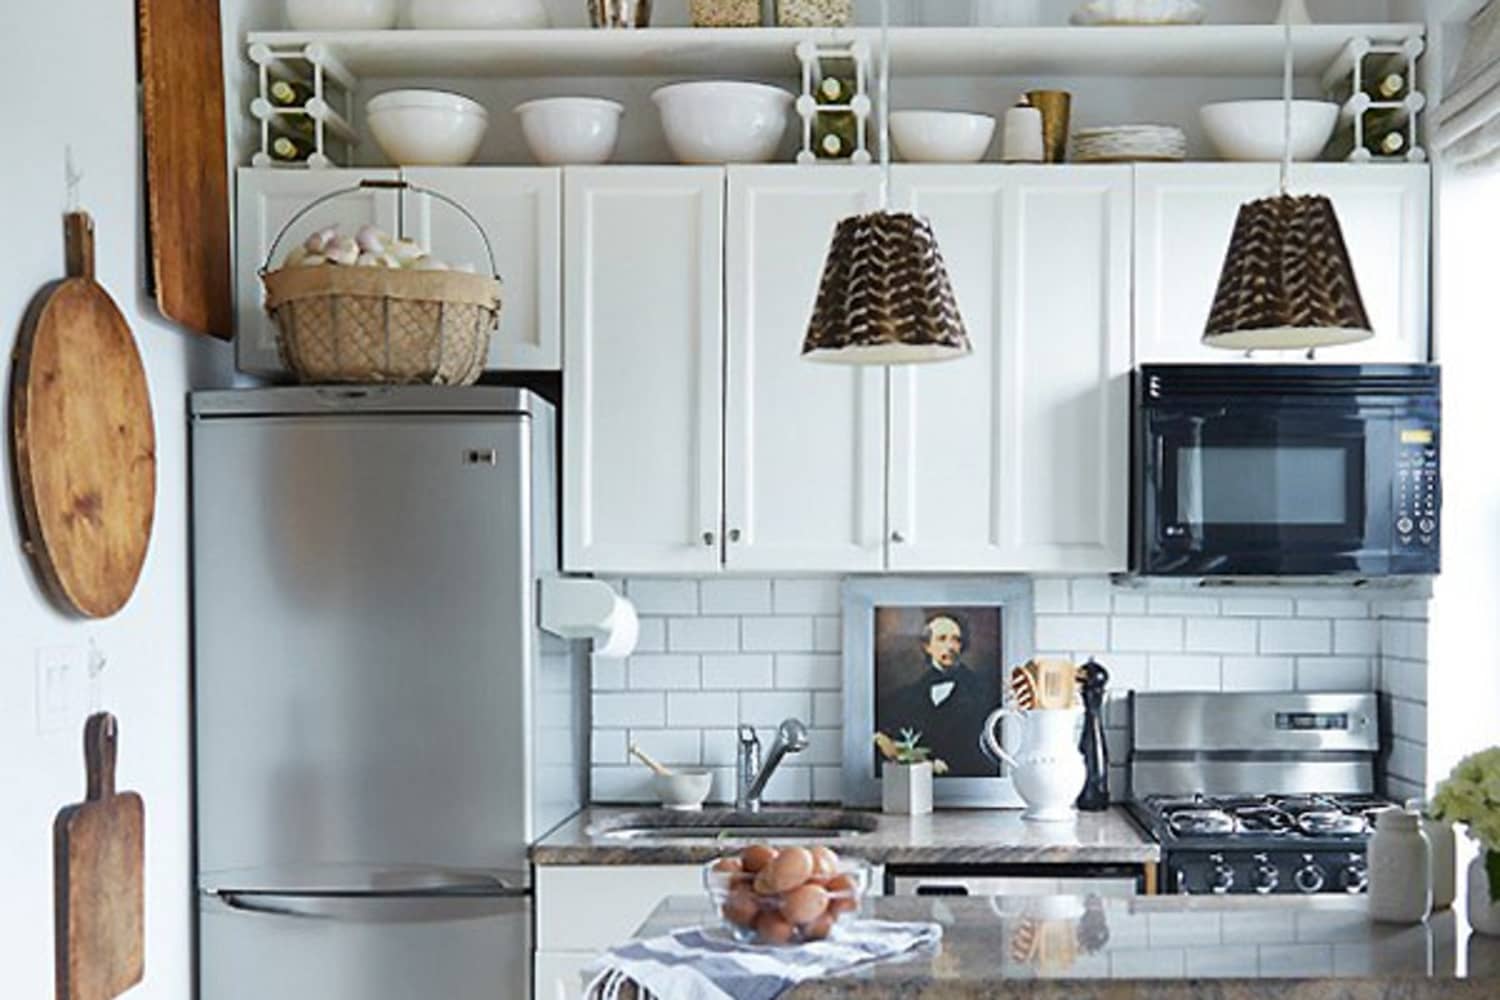 9 Kitchen Storage Tricks to Make Your Small Space Easier to Cook